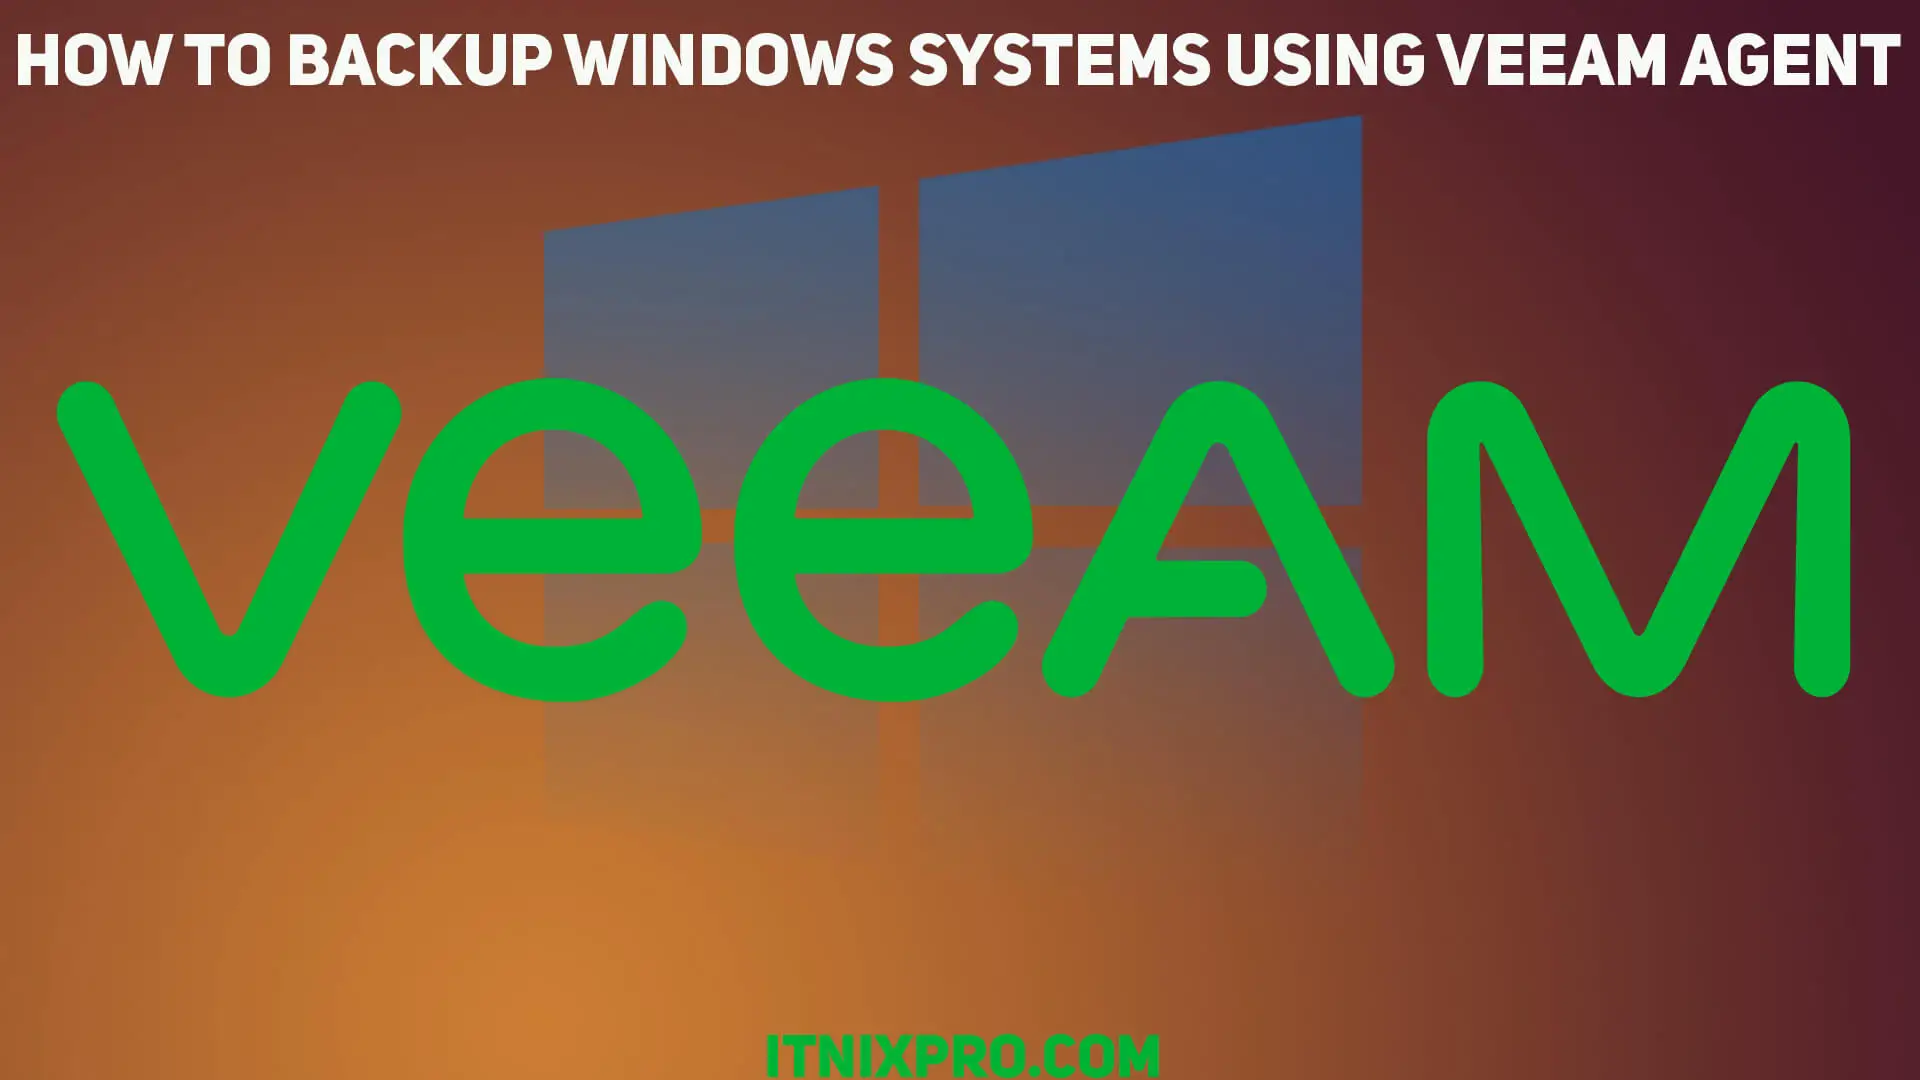 How to Backup Windows systems using Veeam Agent